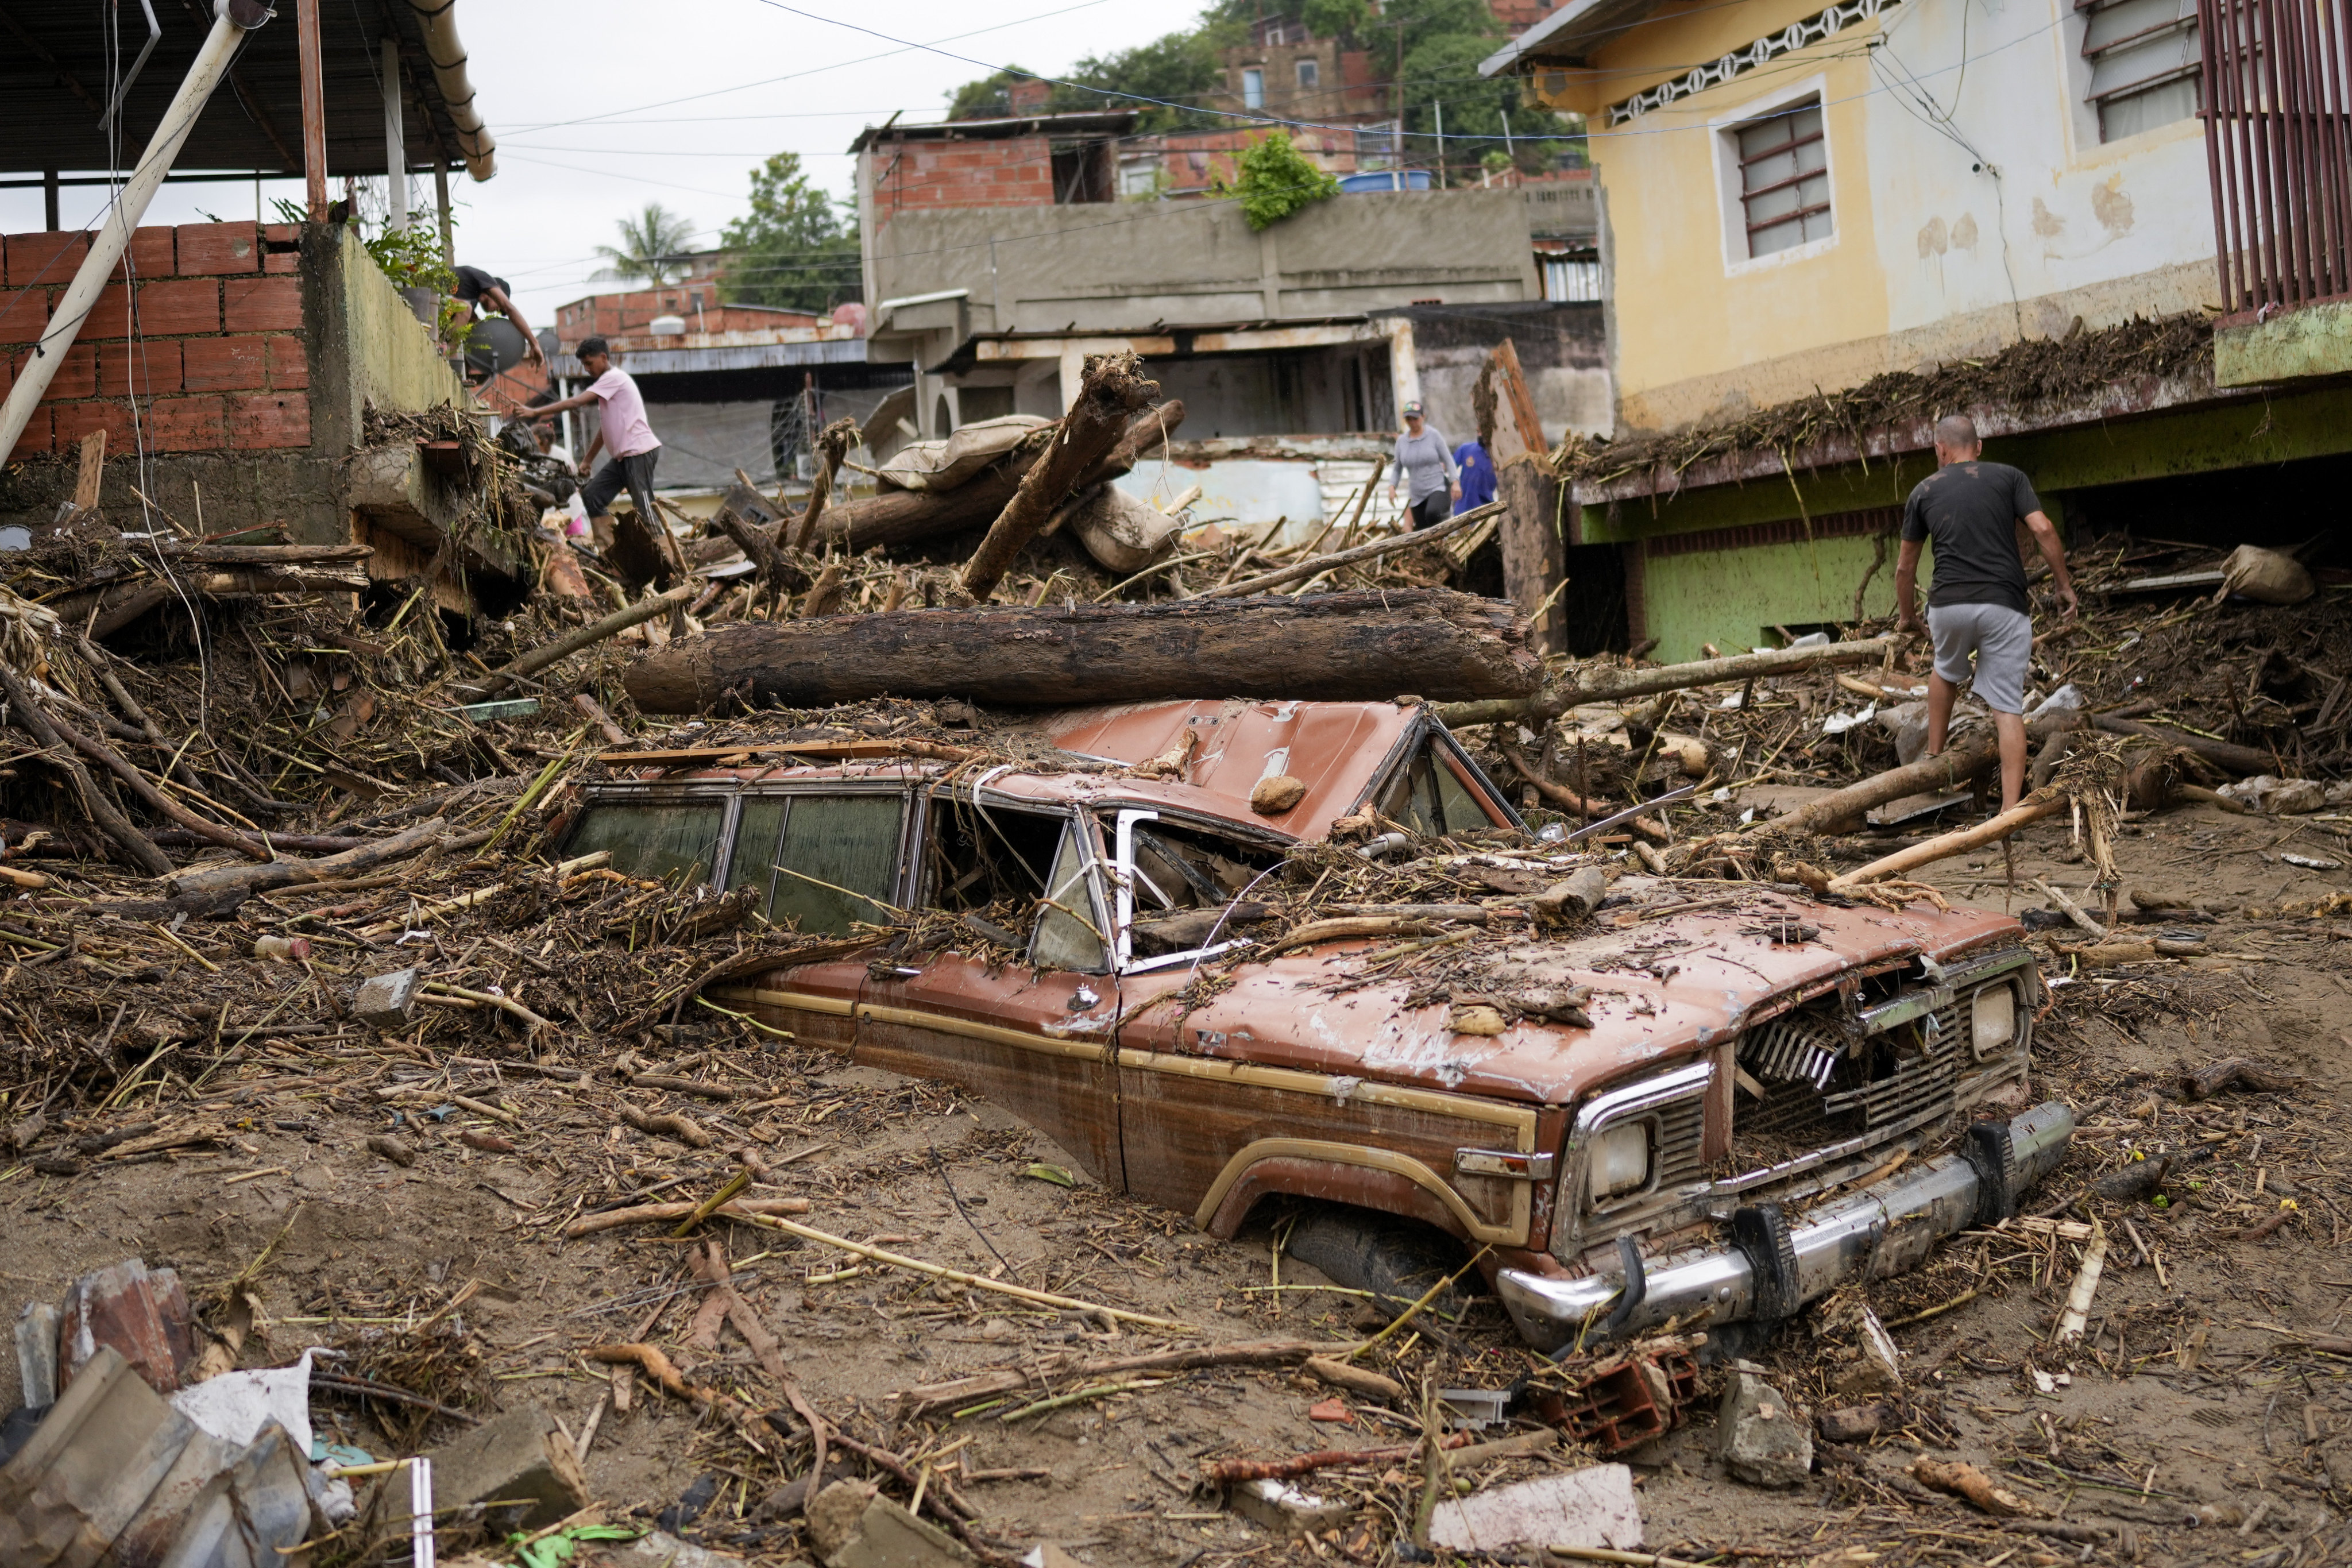 Debris left by flooding caused by a river that overflowed after days of intense rain in Las Tejerias, Venezuela. Photo: AP